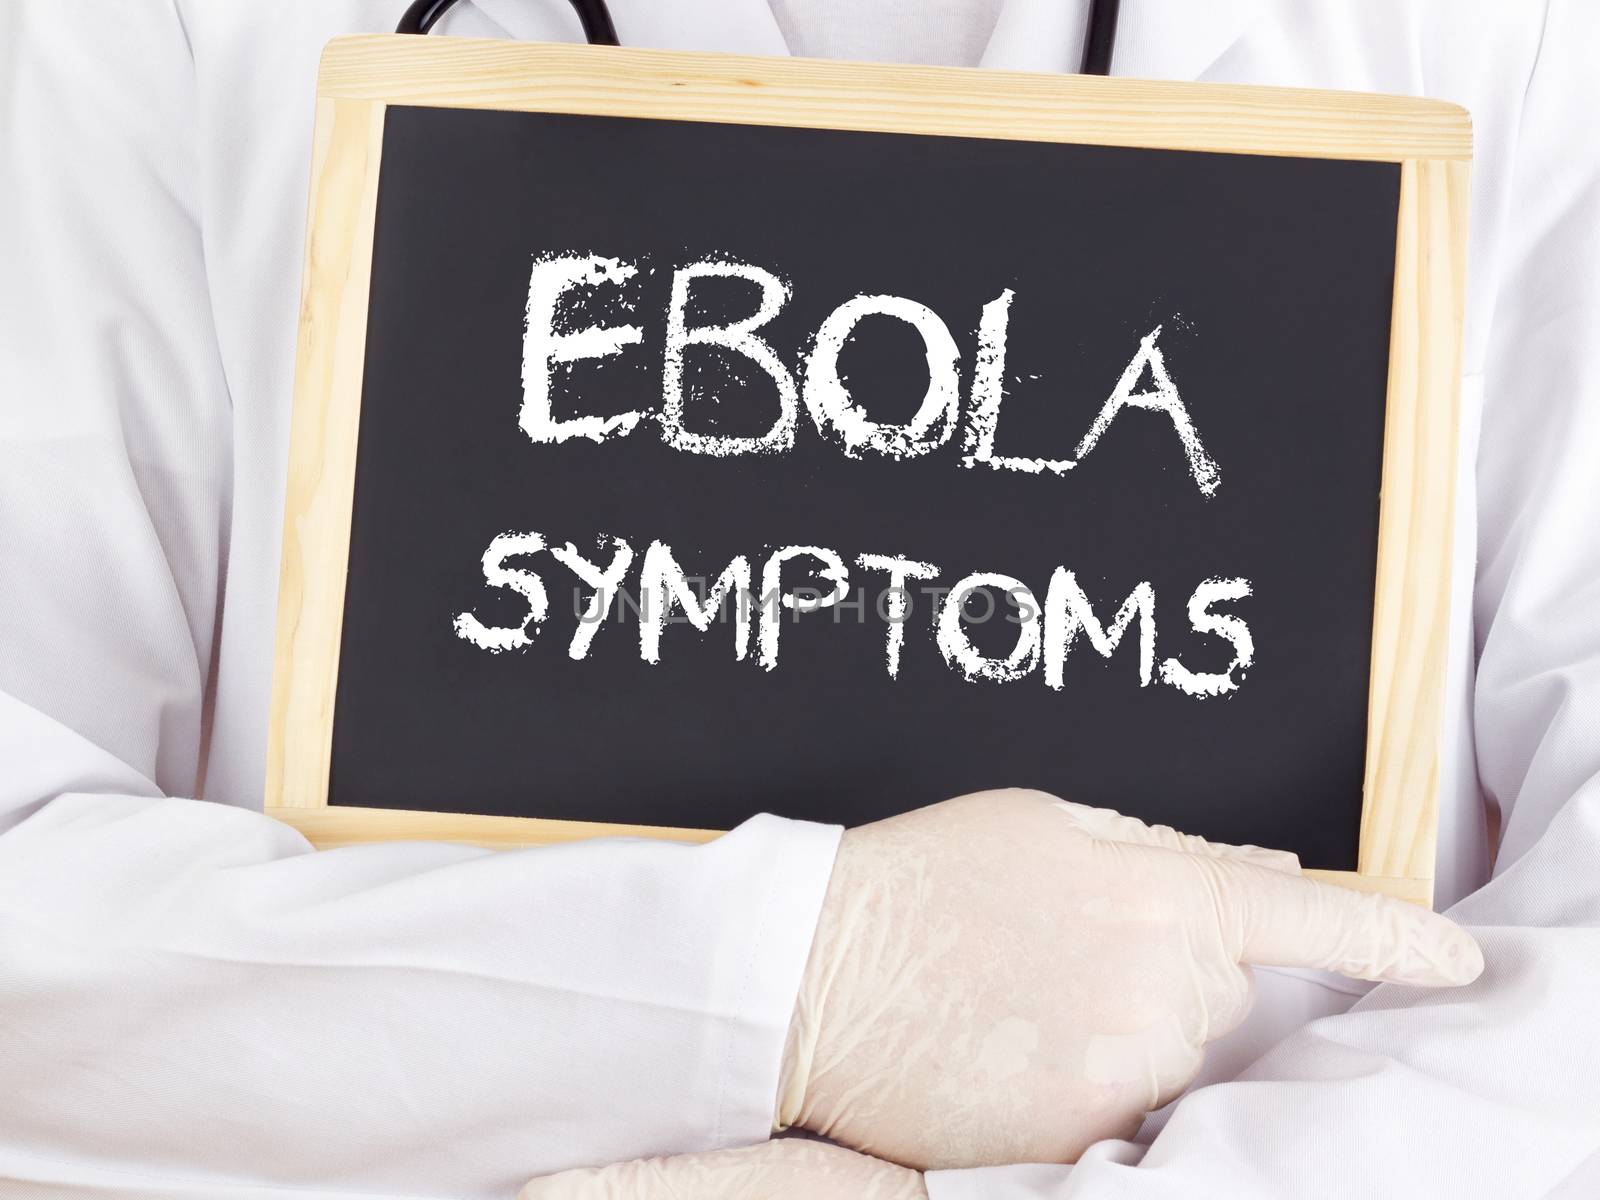 Doctor shows information: Ebola symptoms by gwolters